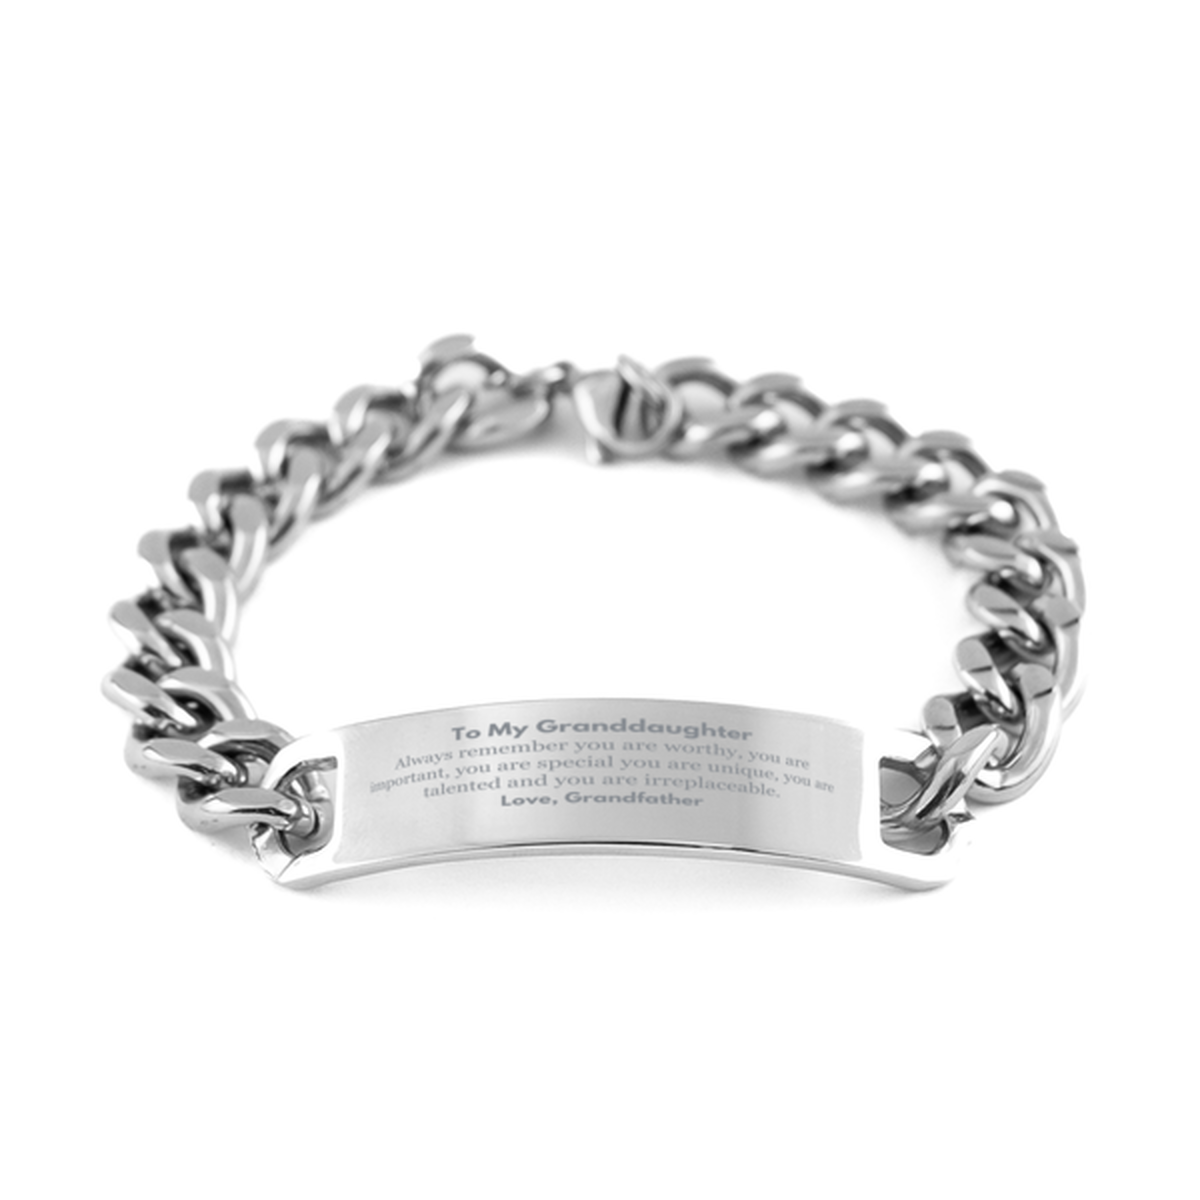 Granddaughter Birthday Gifts from Grandfather, Inspirational Cuban Chain Stainless Steel Bracelet for Granddaughter Christmas Graduation Gifts for Granddaughter Always remember you are worthy, you are important. Love, Grandfather